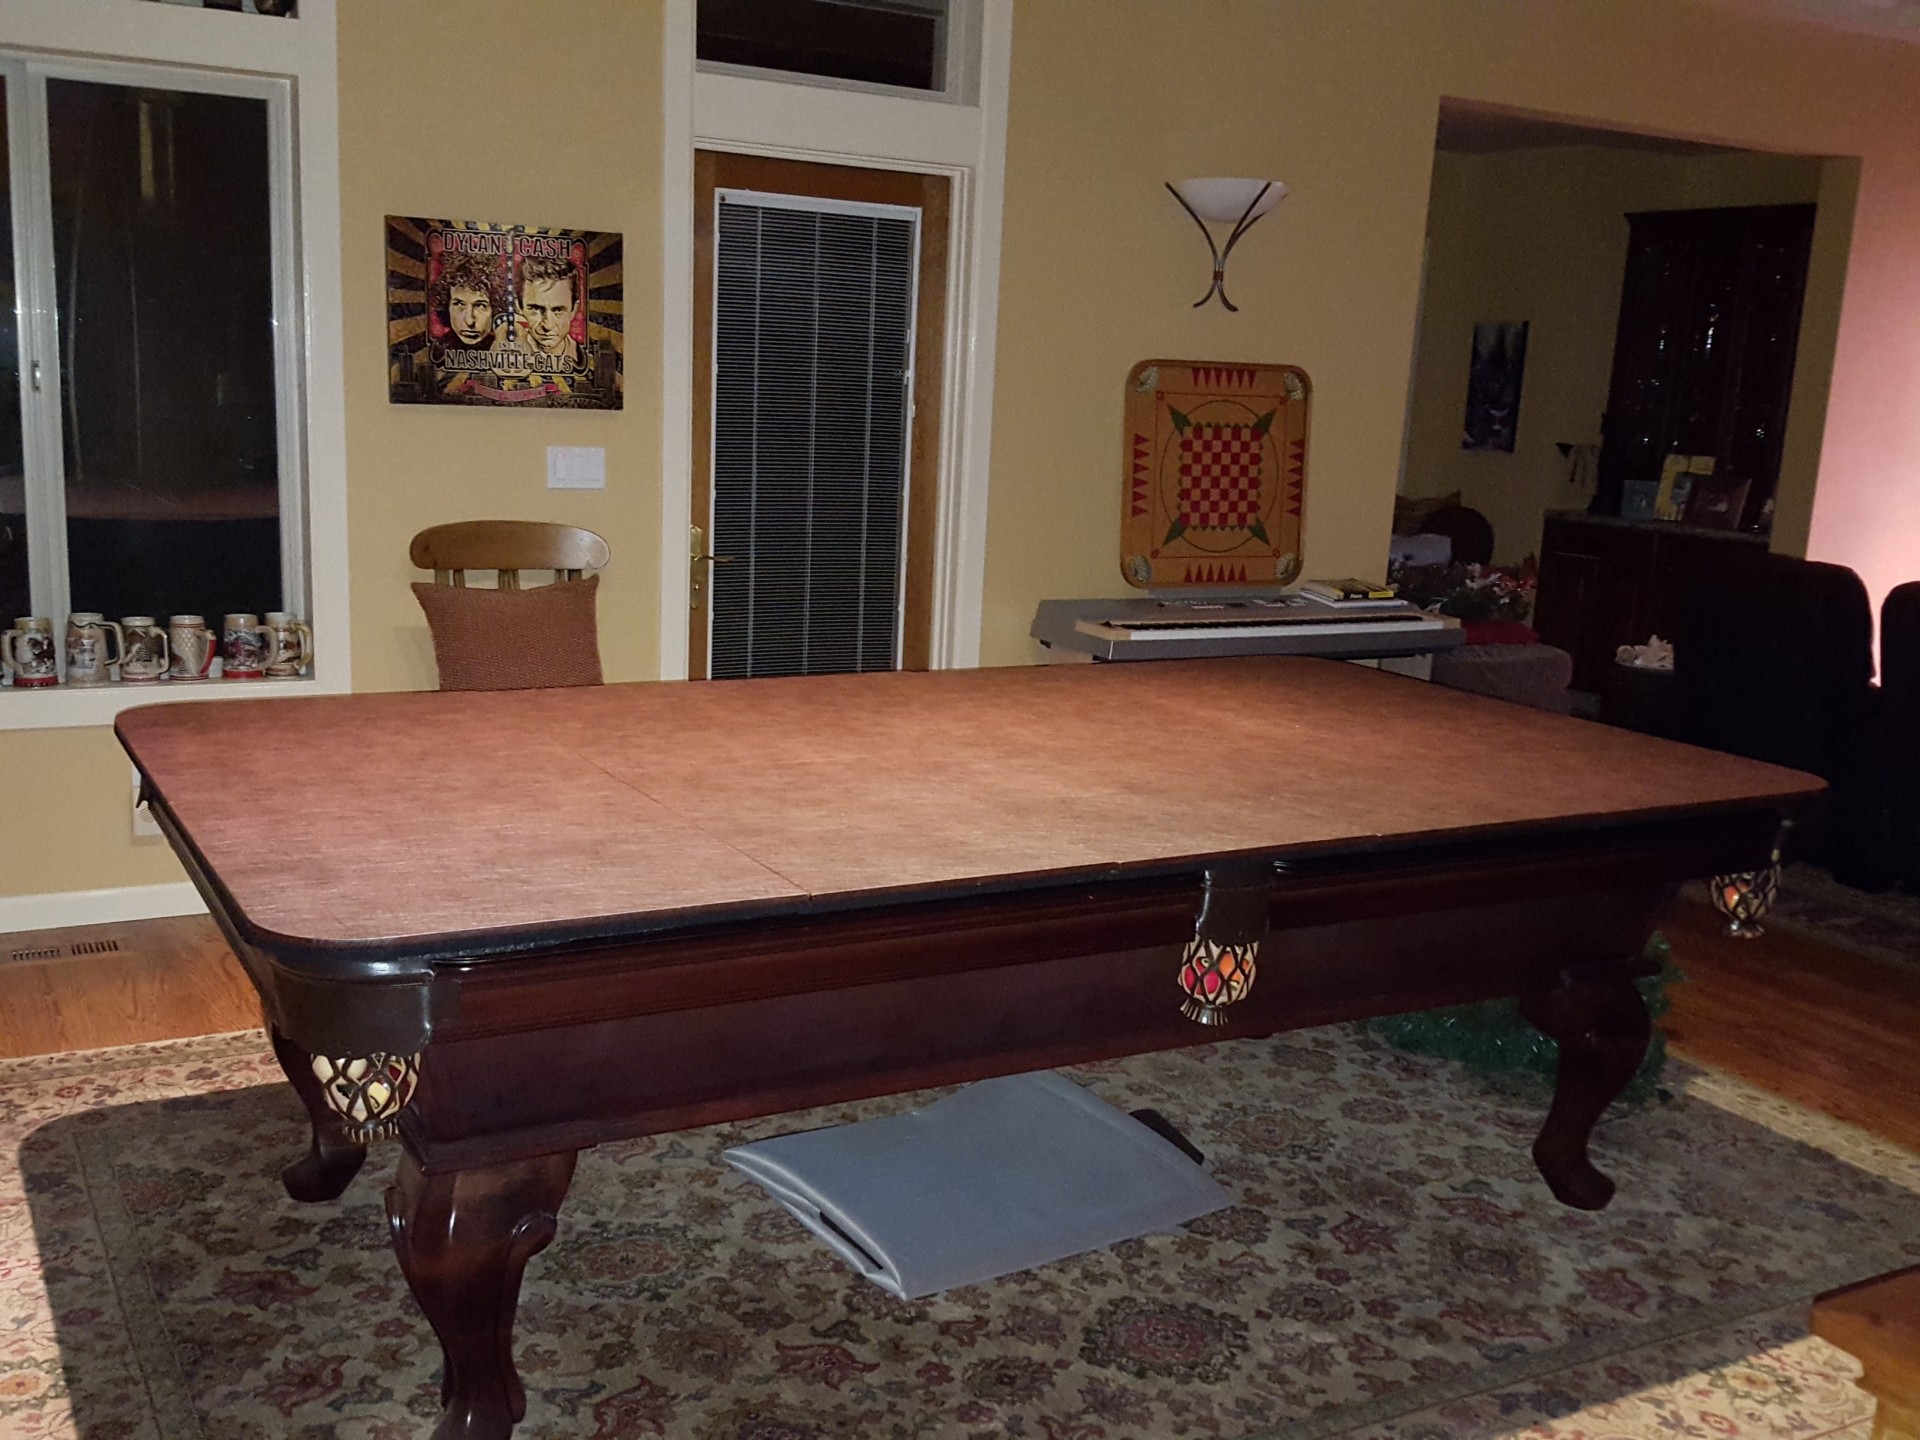 woodem cover to turn pool table into kitchen table